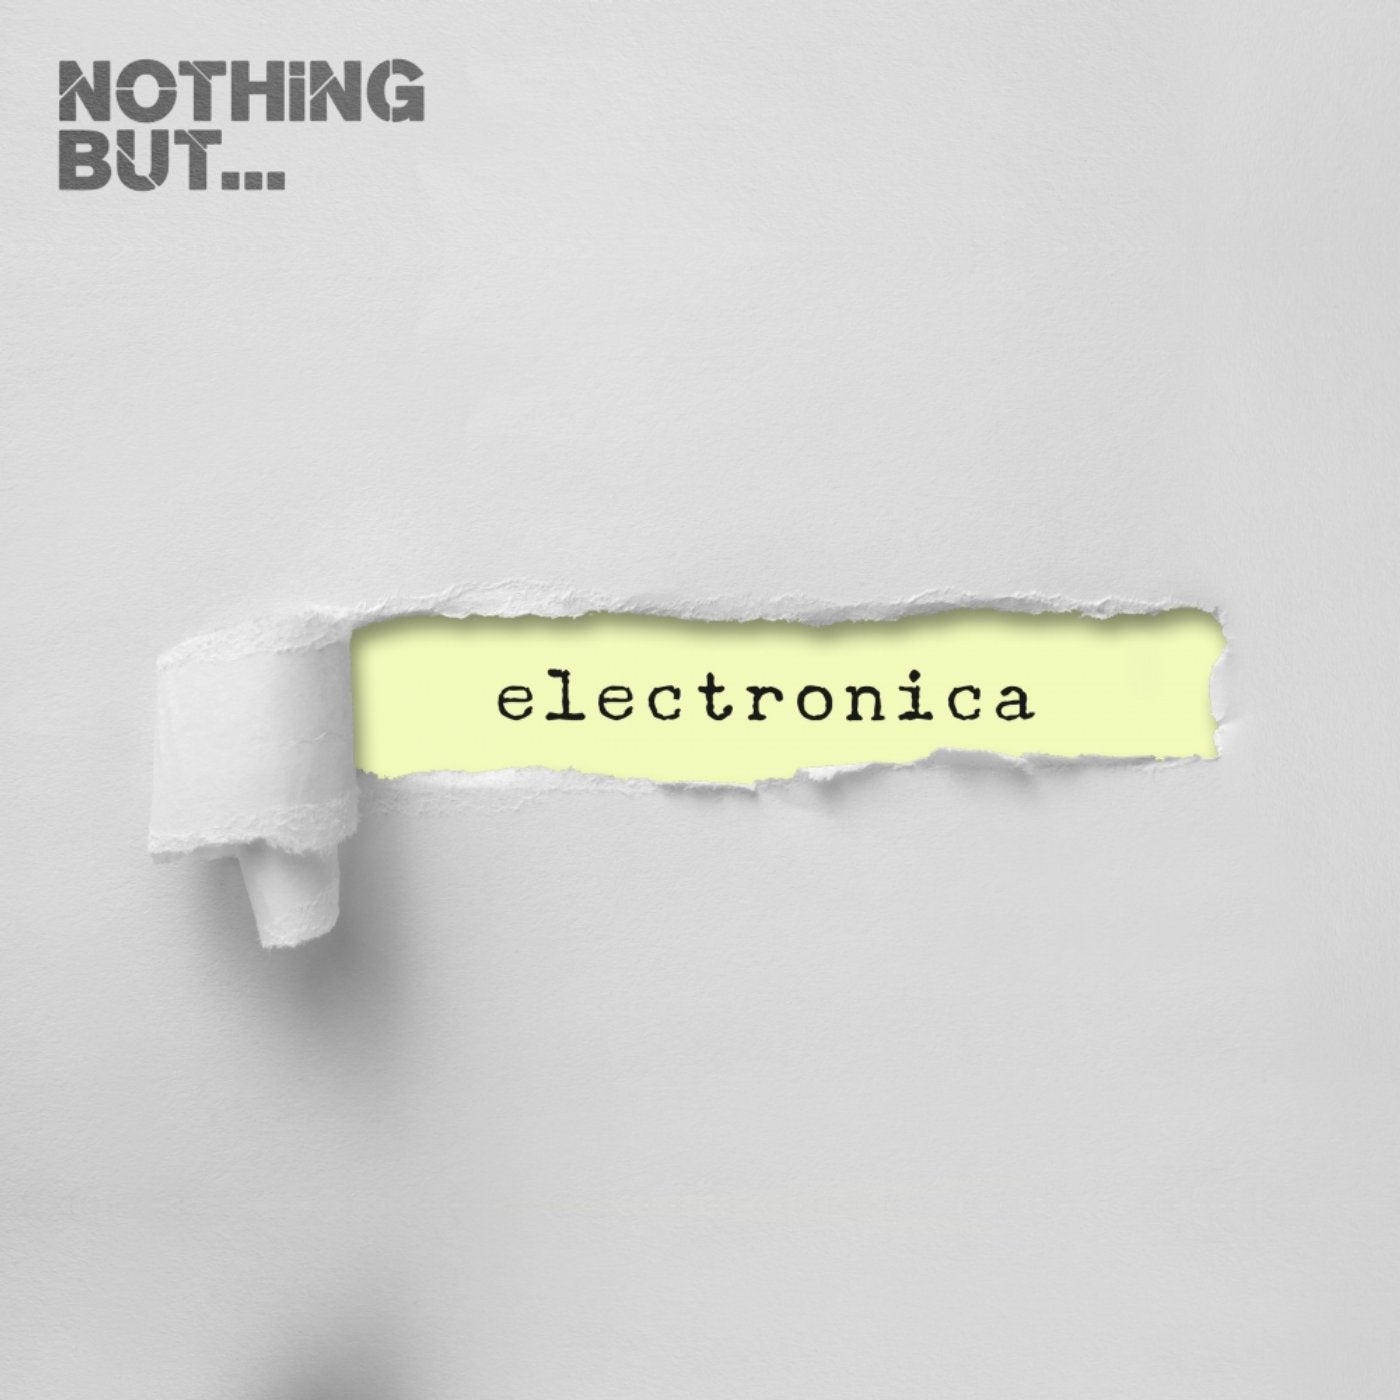 Nothing But. Electronica (I)